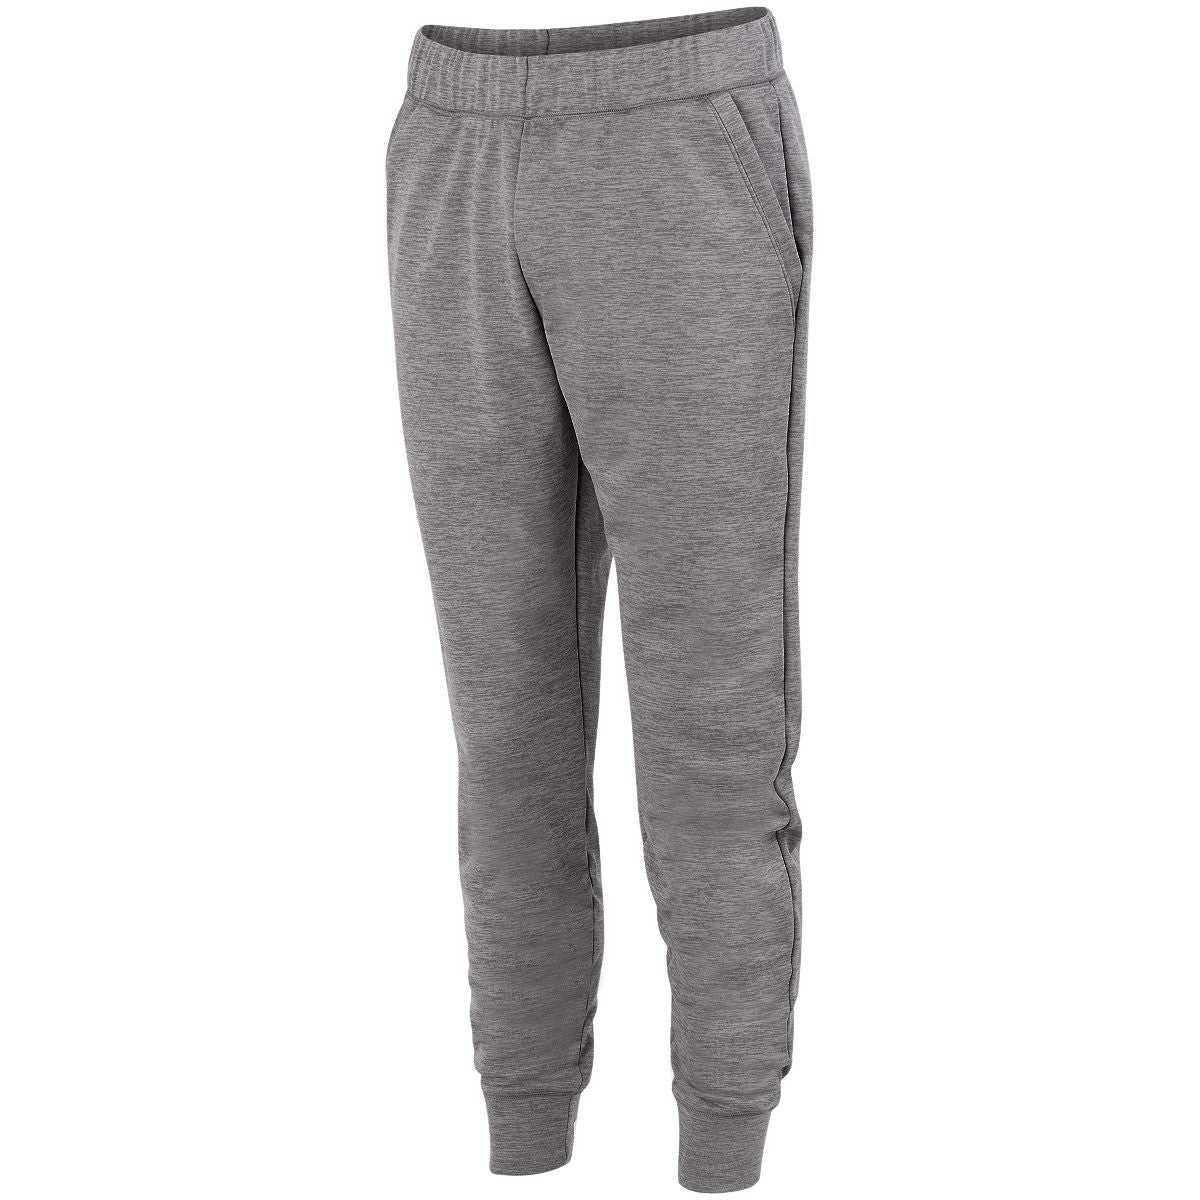 Augusta Sportswear Tonal Heather Fleece Jogger in Graphite  -Part of the Adult, Augusta-Products, Tonal-Fleece-Collection product lines at KanaleyCreations.com